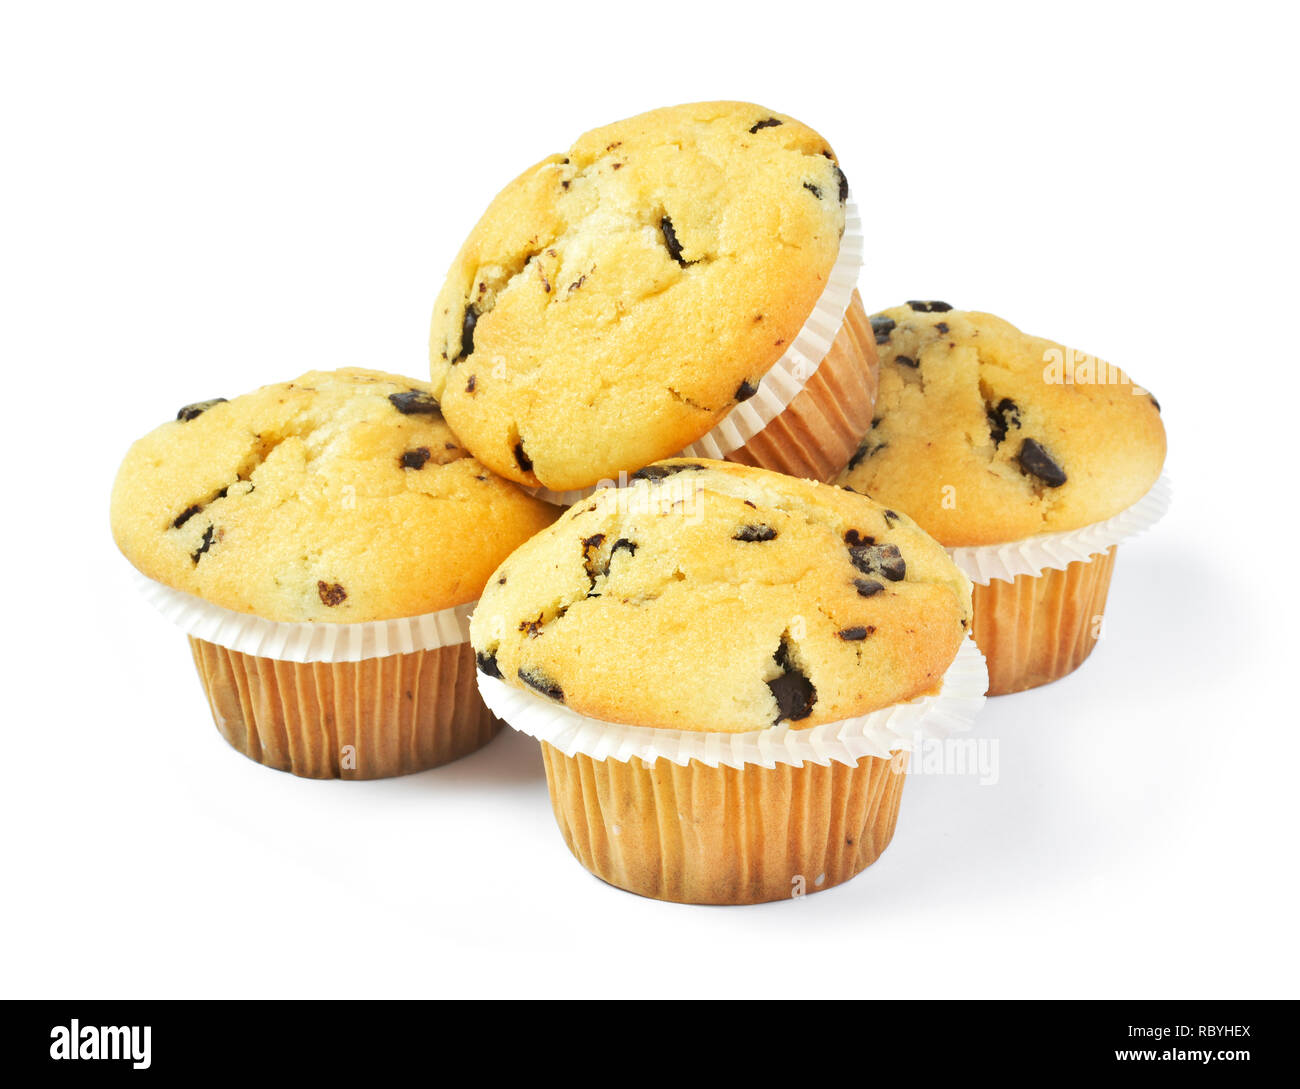 Delicious vanilla muffins with chocolate, isolated on white background. Muffins with paper, sweet food or unhealthy eating theme. Stock Photo